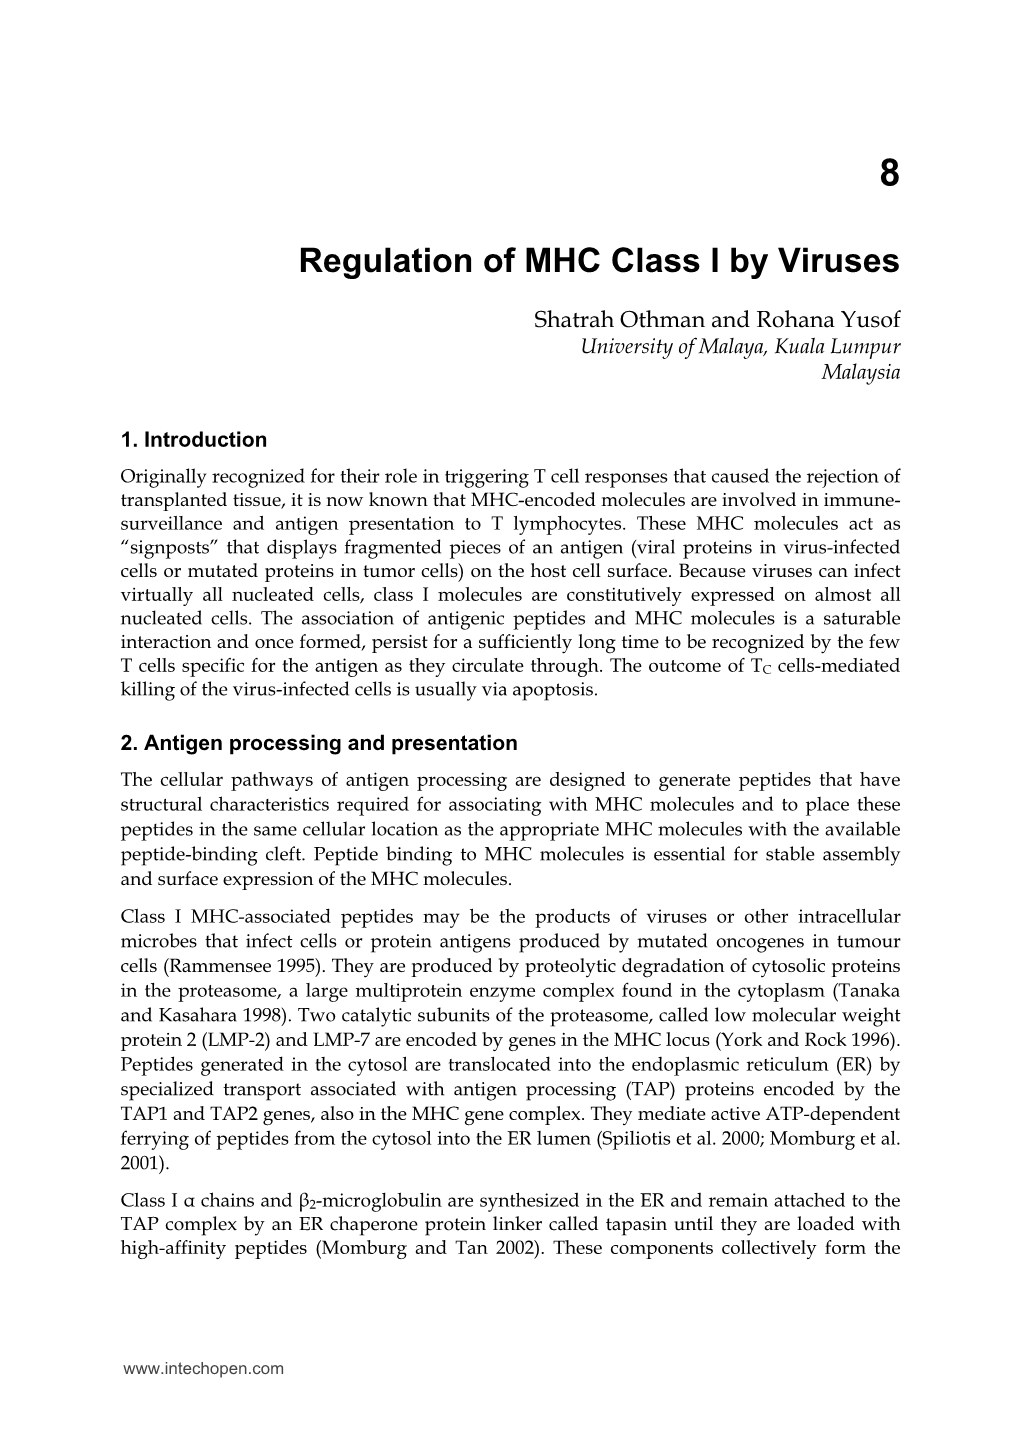 Regulation of MHC Class I by Viruses